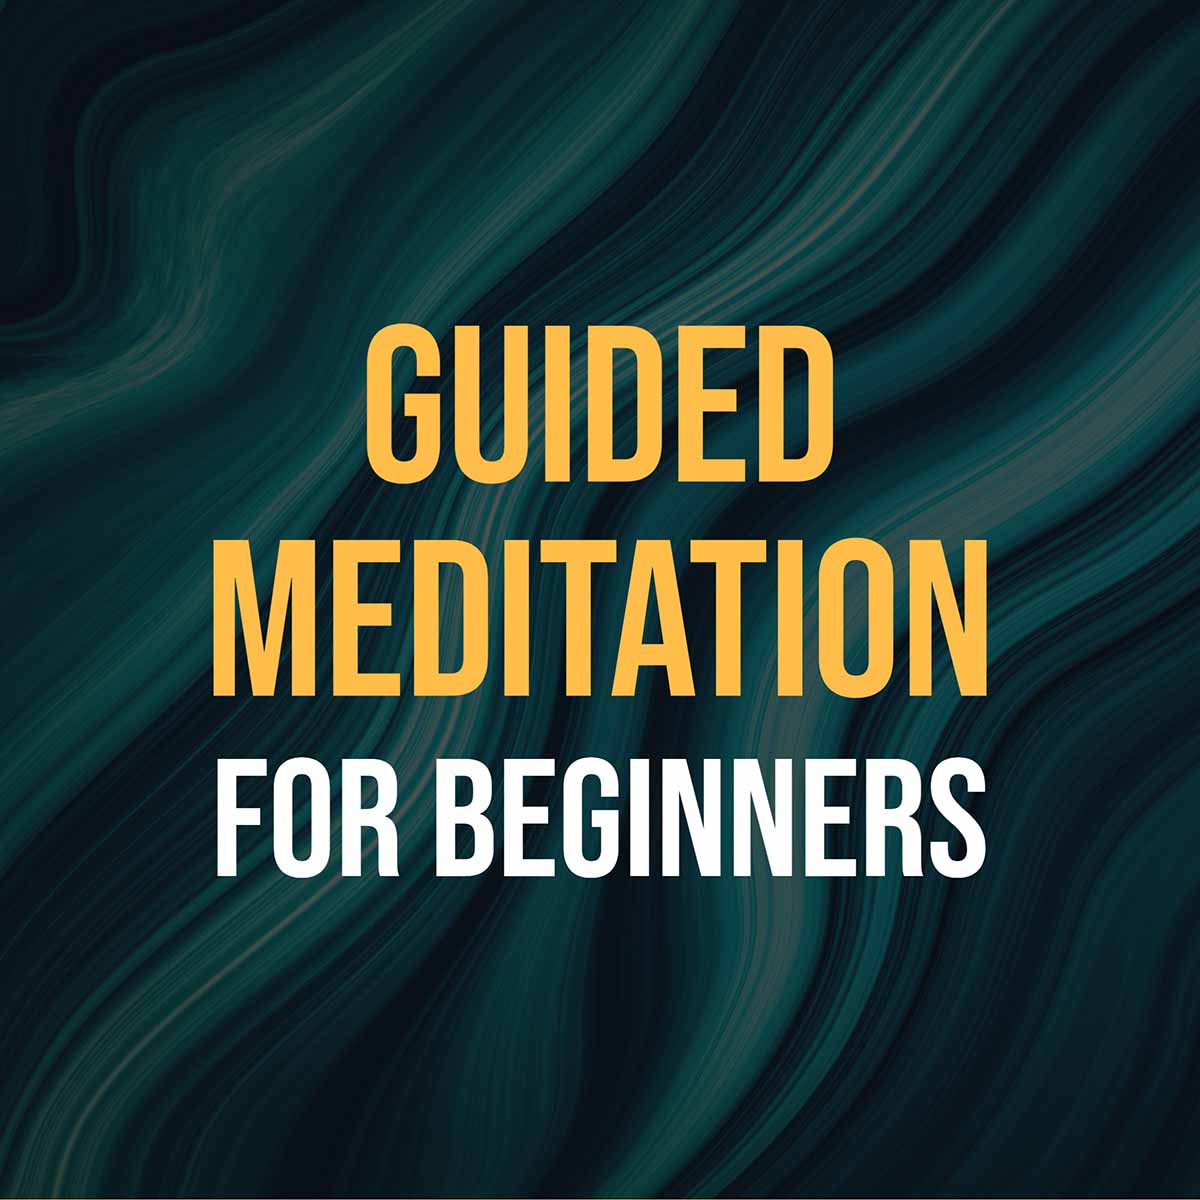 How To Meditate (Guided Meditation For Beginners 5 Min) Free Download